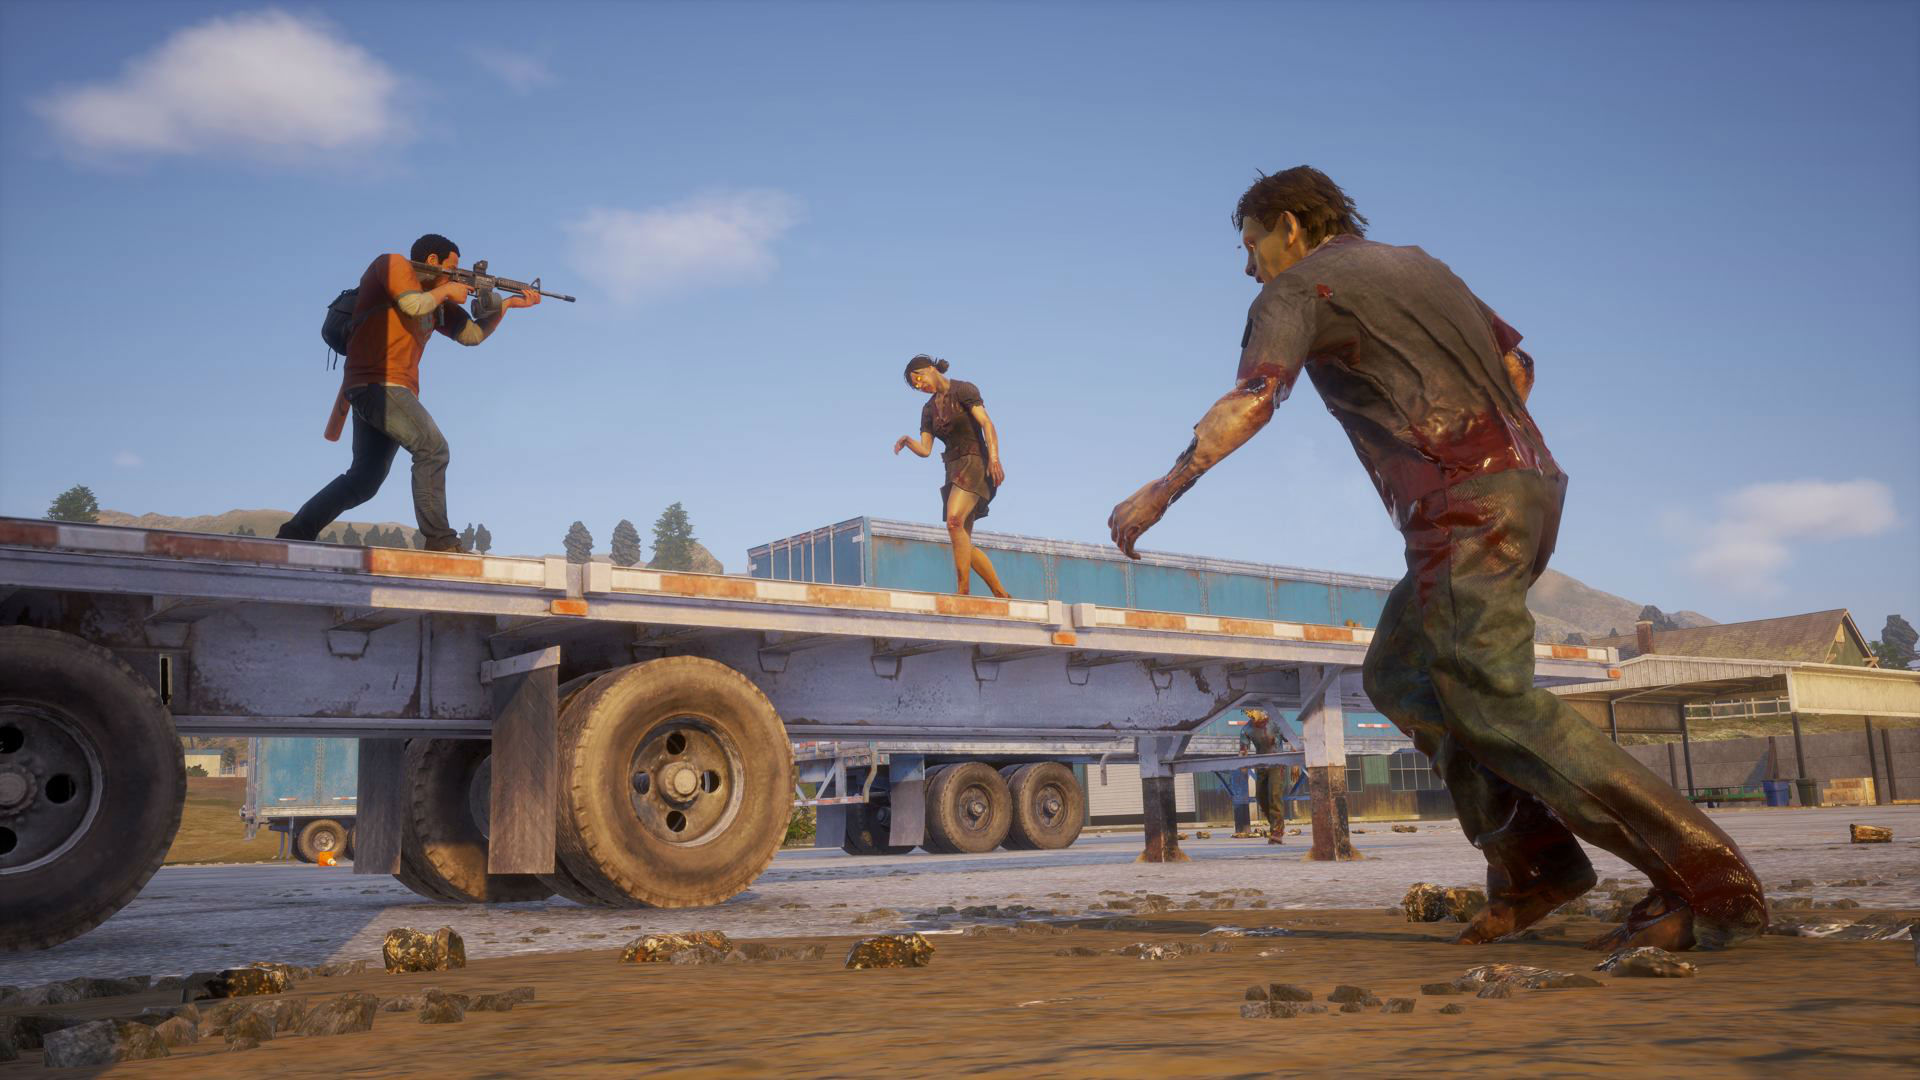 How to play multiplayer Co-op with friends on State of Decay 2? - Pro Game  Guides